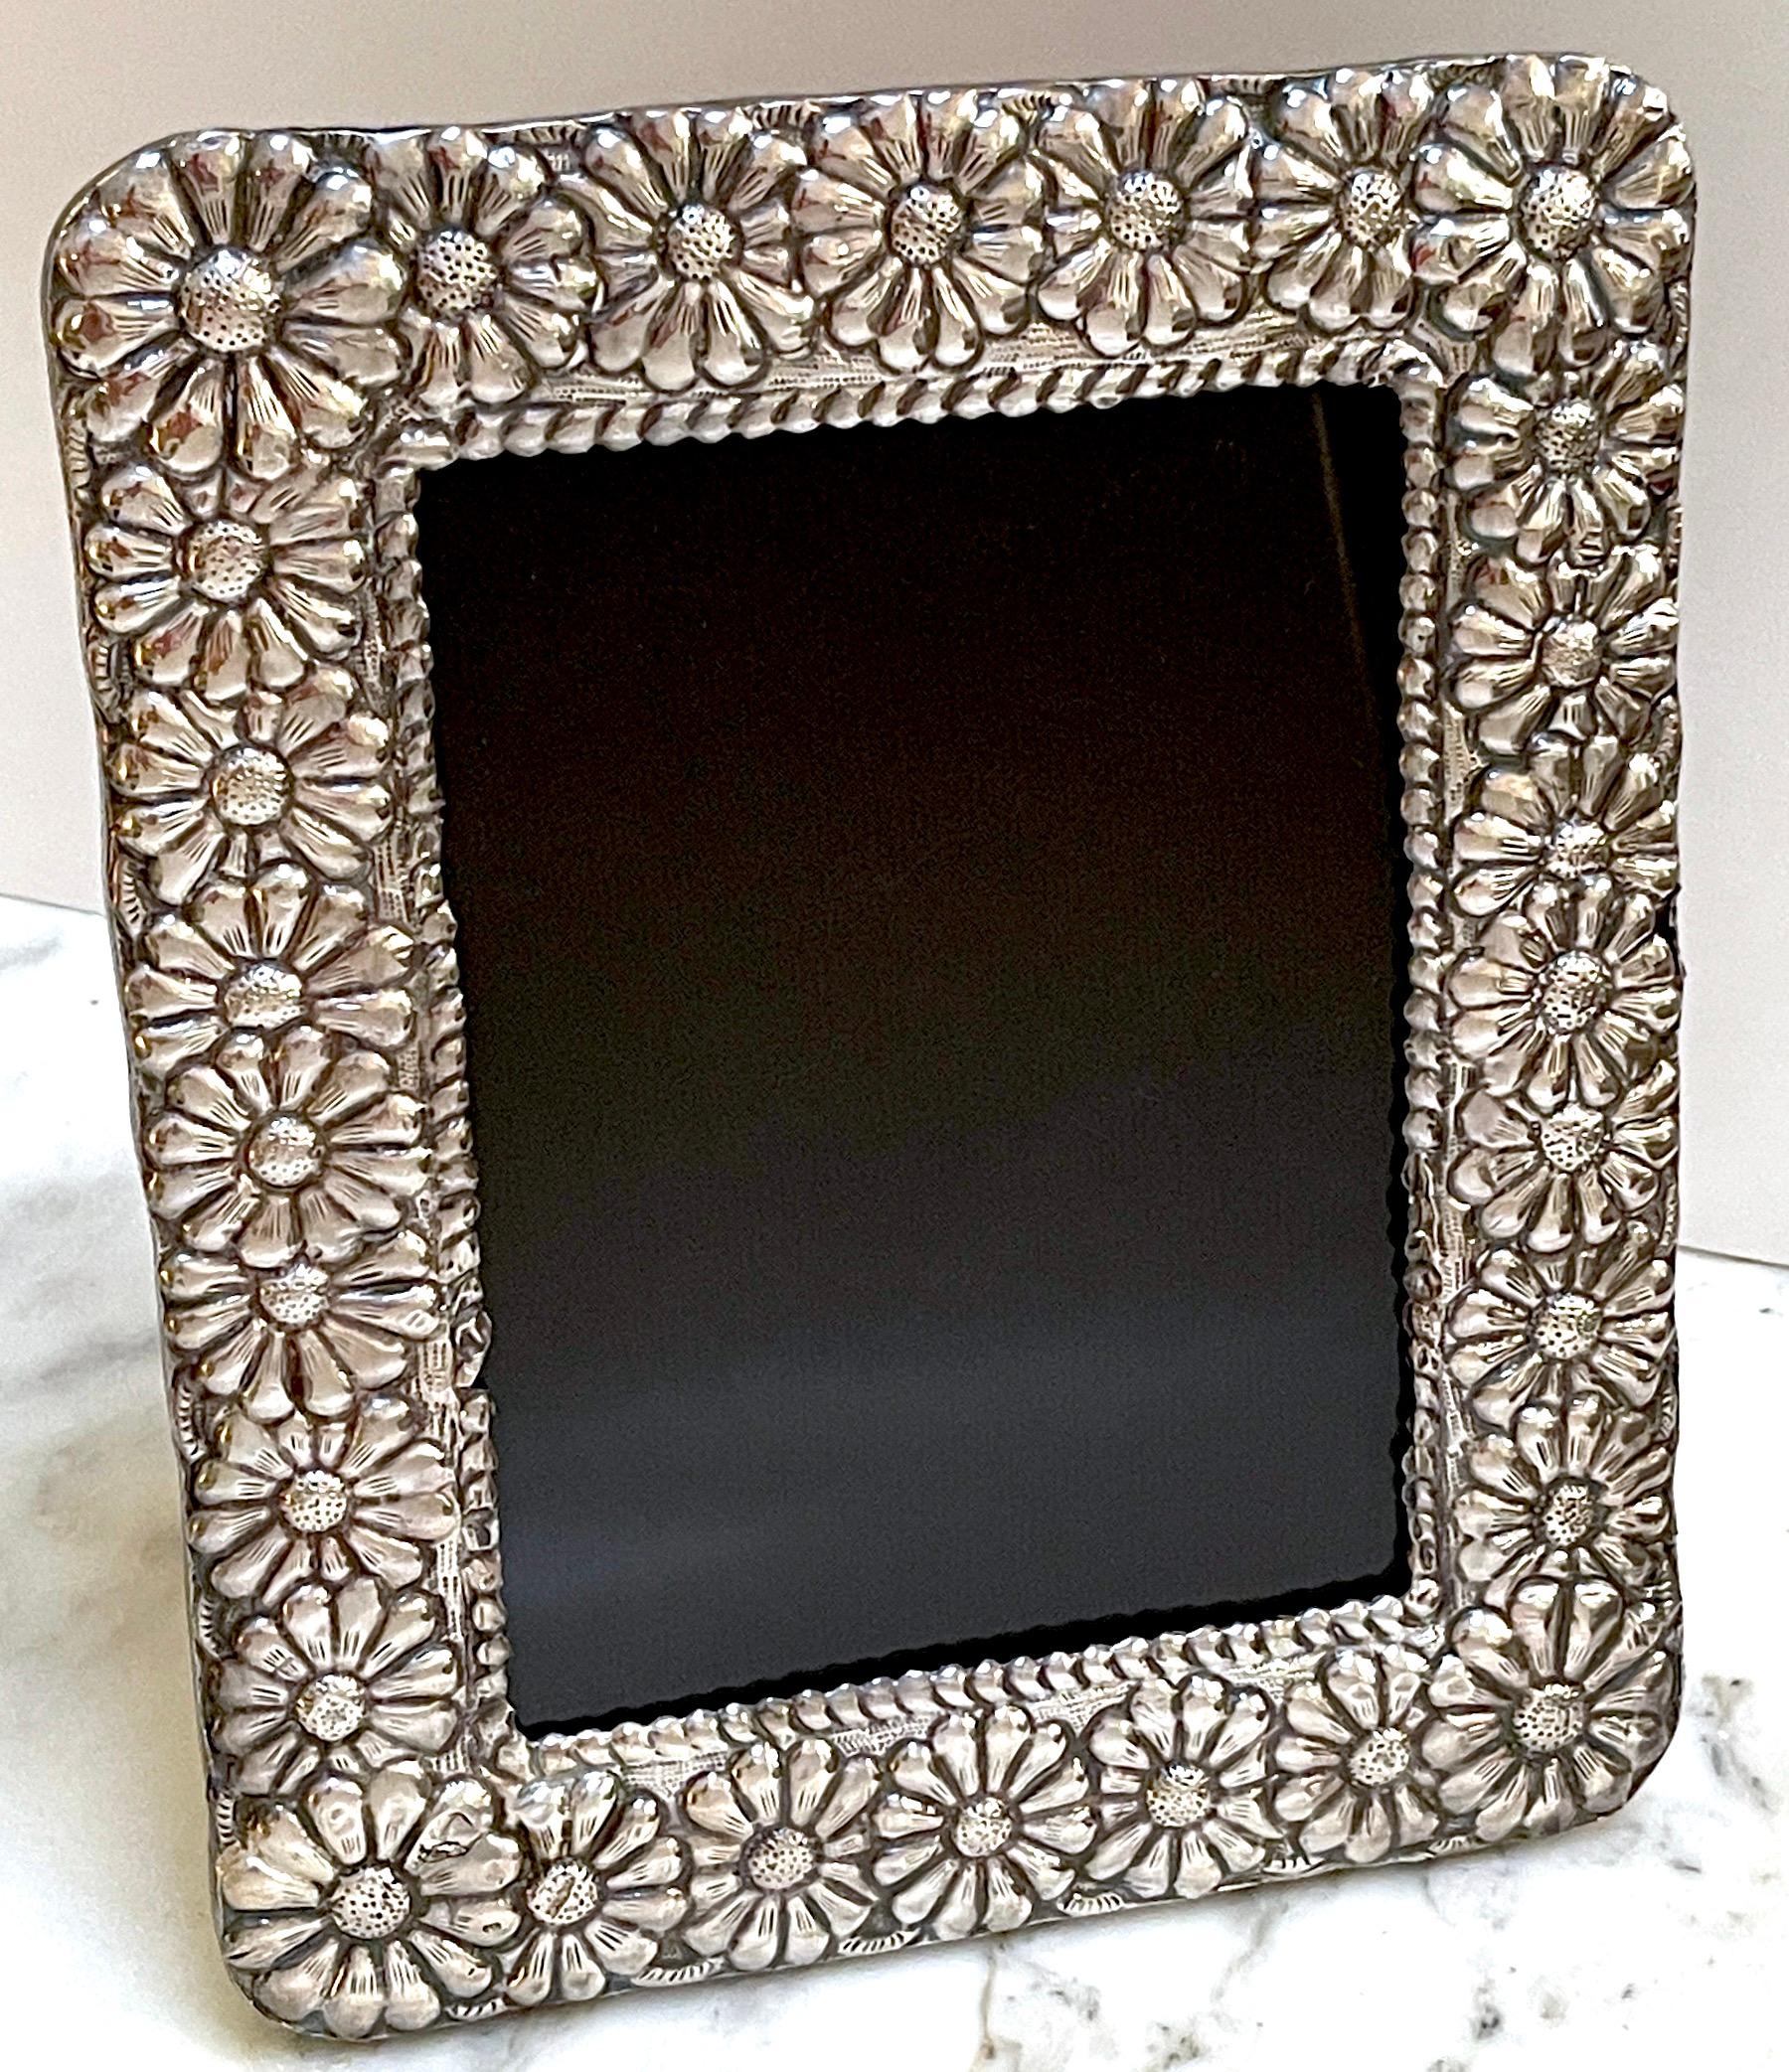 Modern Sterling Taxco School Picture Frame
Mexico, circa 1960s
With a continuous surround of repoused flower-heads 
Supported on a beautifully crafted hardwood backing with inset glass front.
Stamped .950 lower left corner. 
This frame will hold a